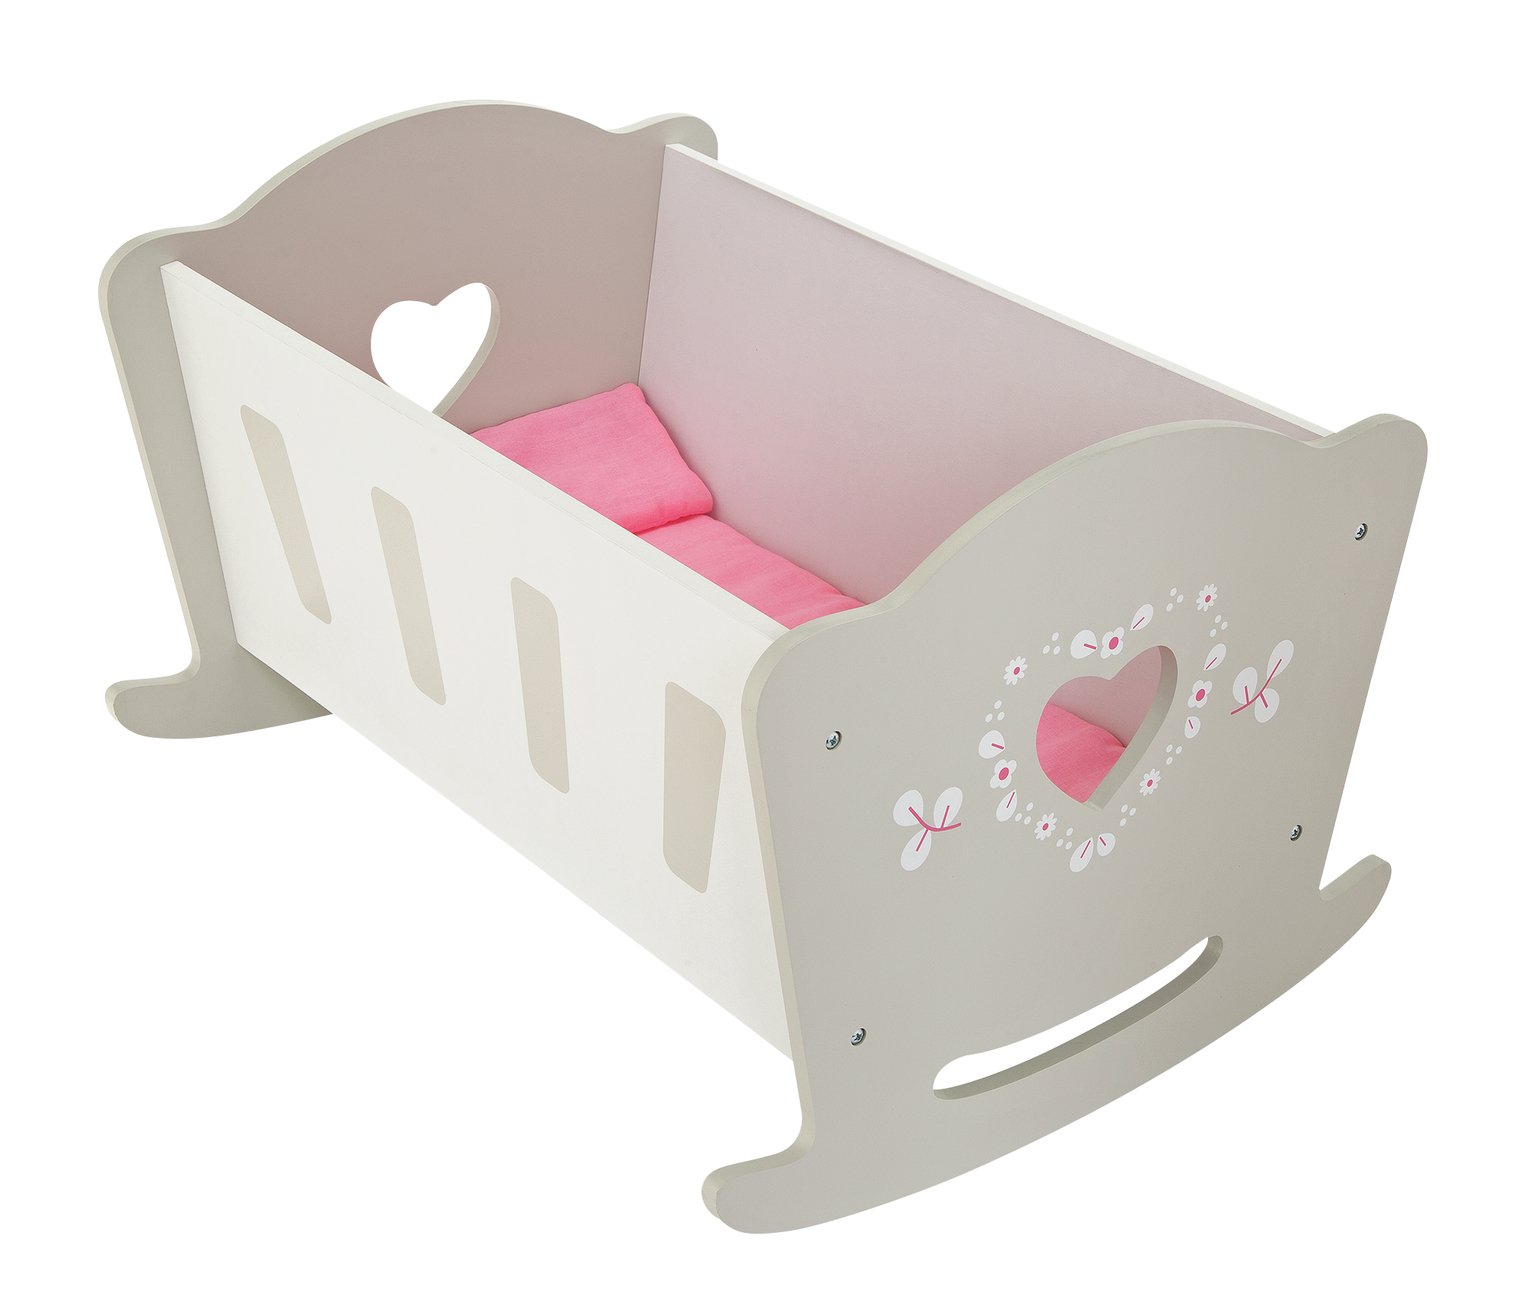 toy wooden cot